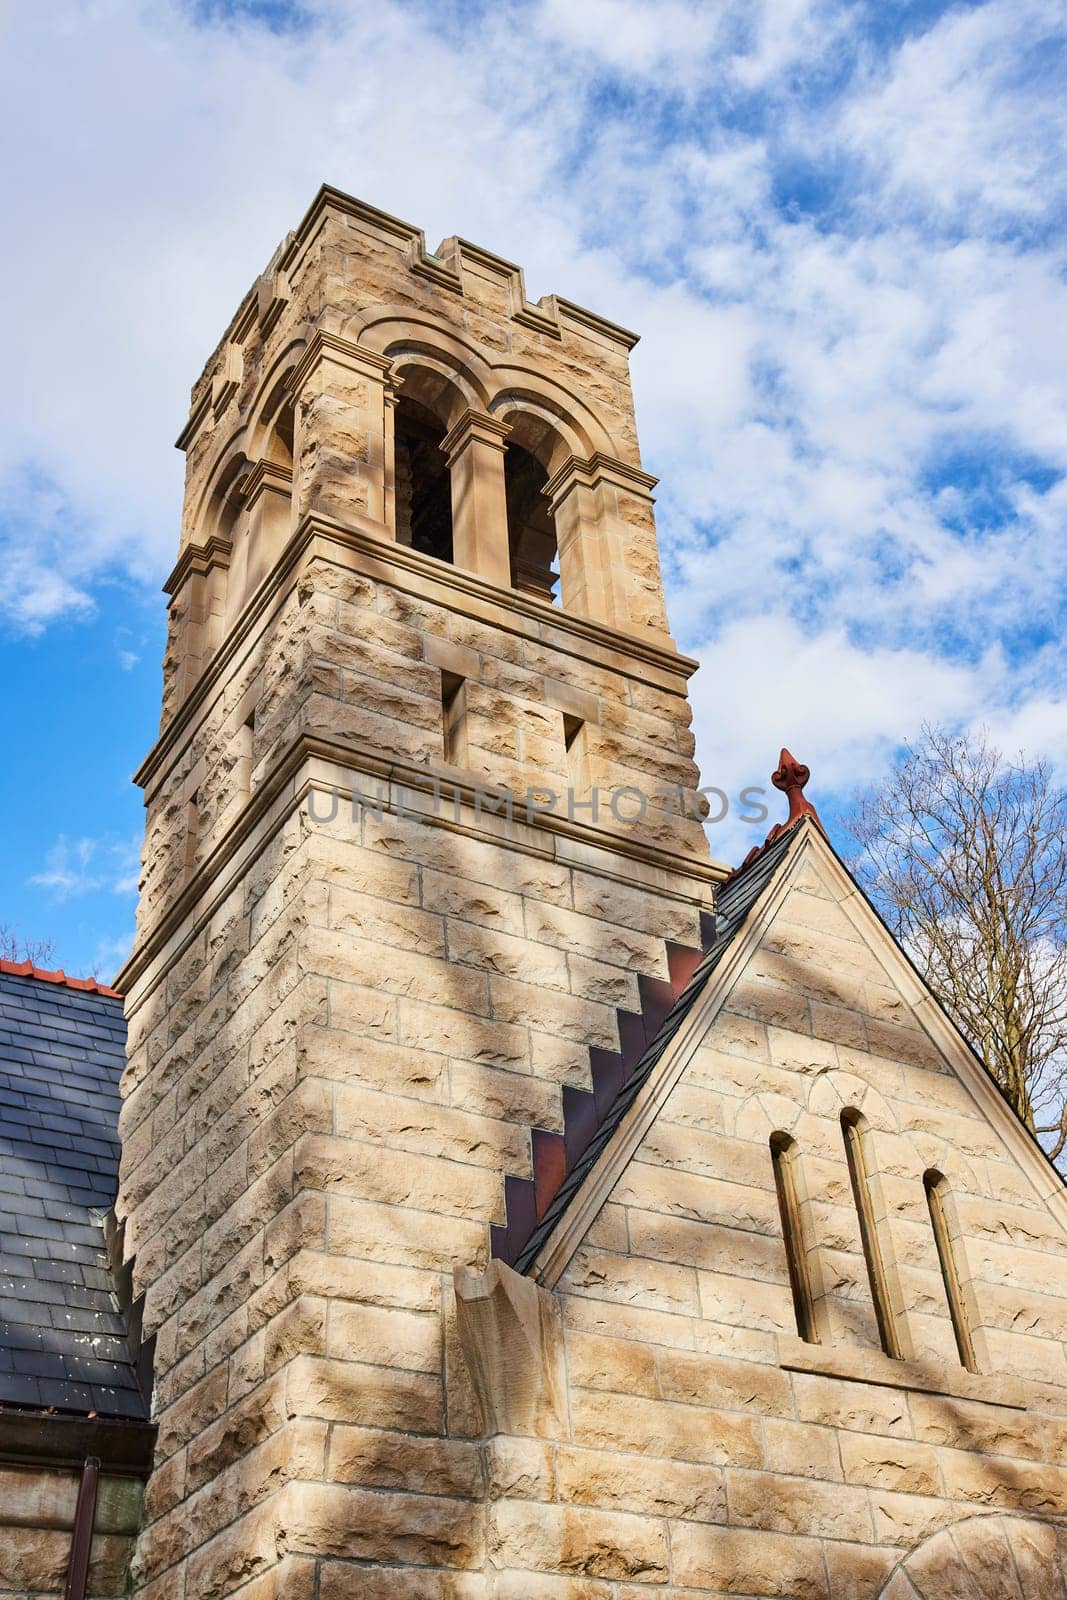 Imposing stone tower from historic church, displaying craftsmanship and durability, rising against a partly cloudy sky in Lindenwood Cemetery, Fort Wayne, Indiana.